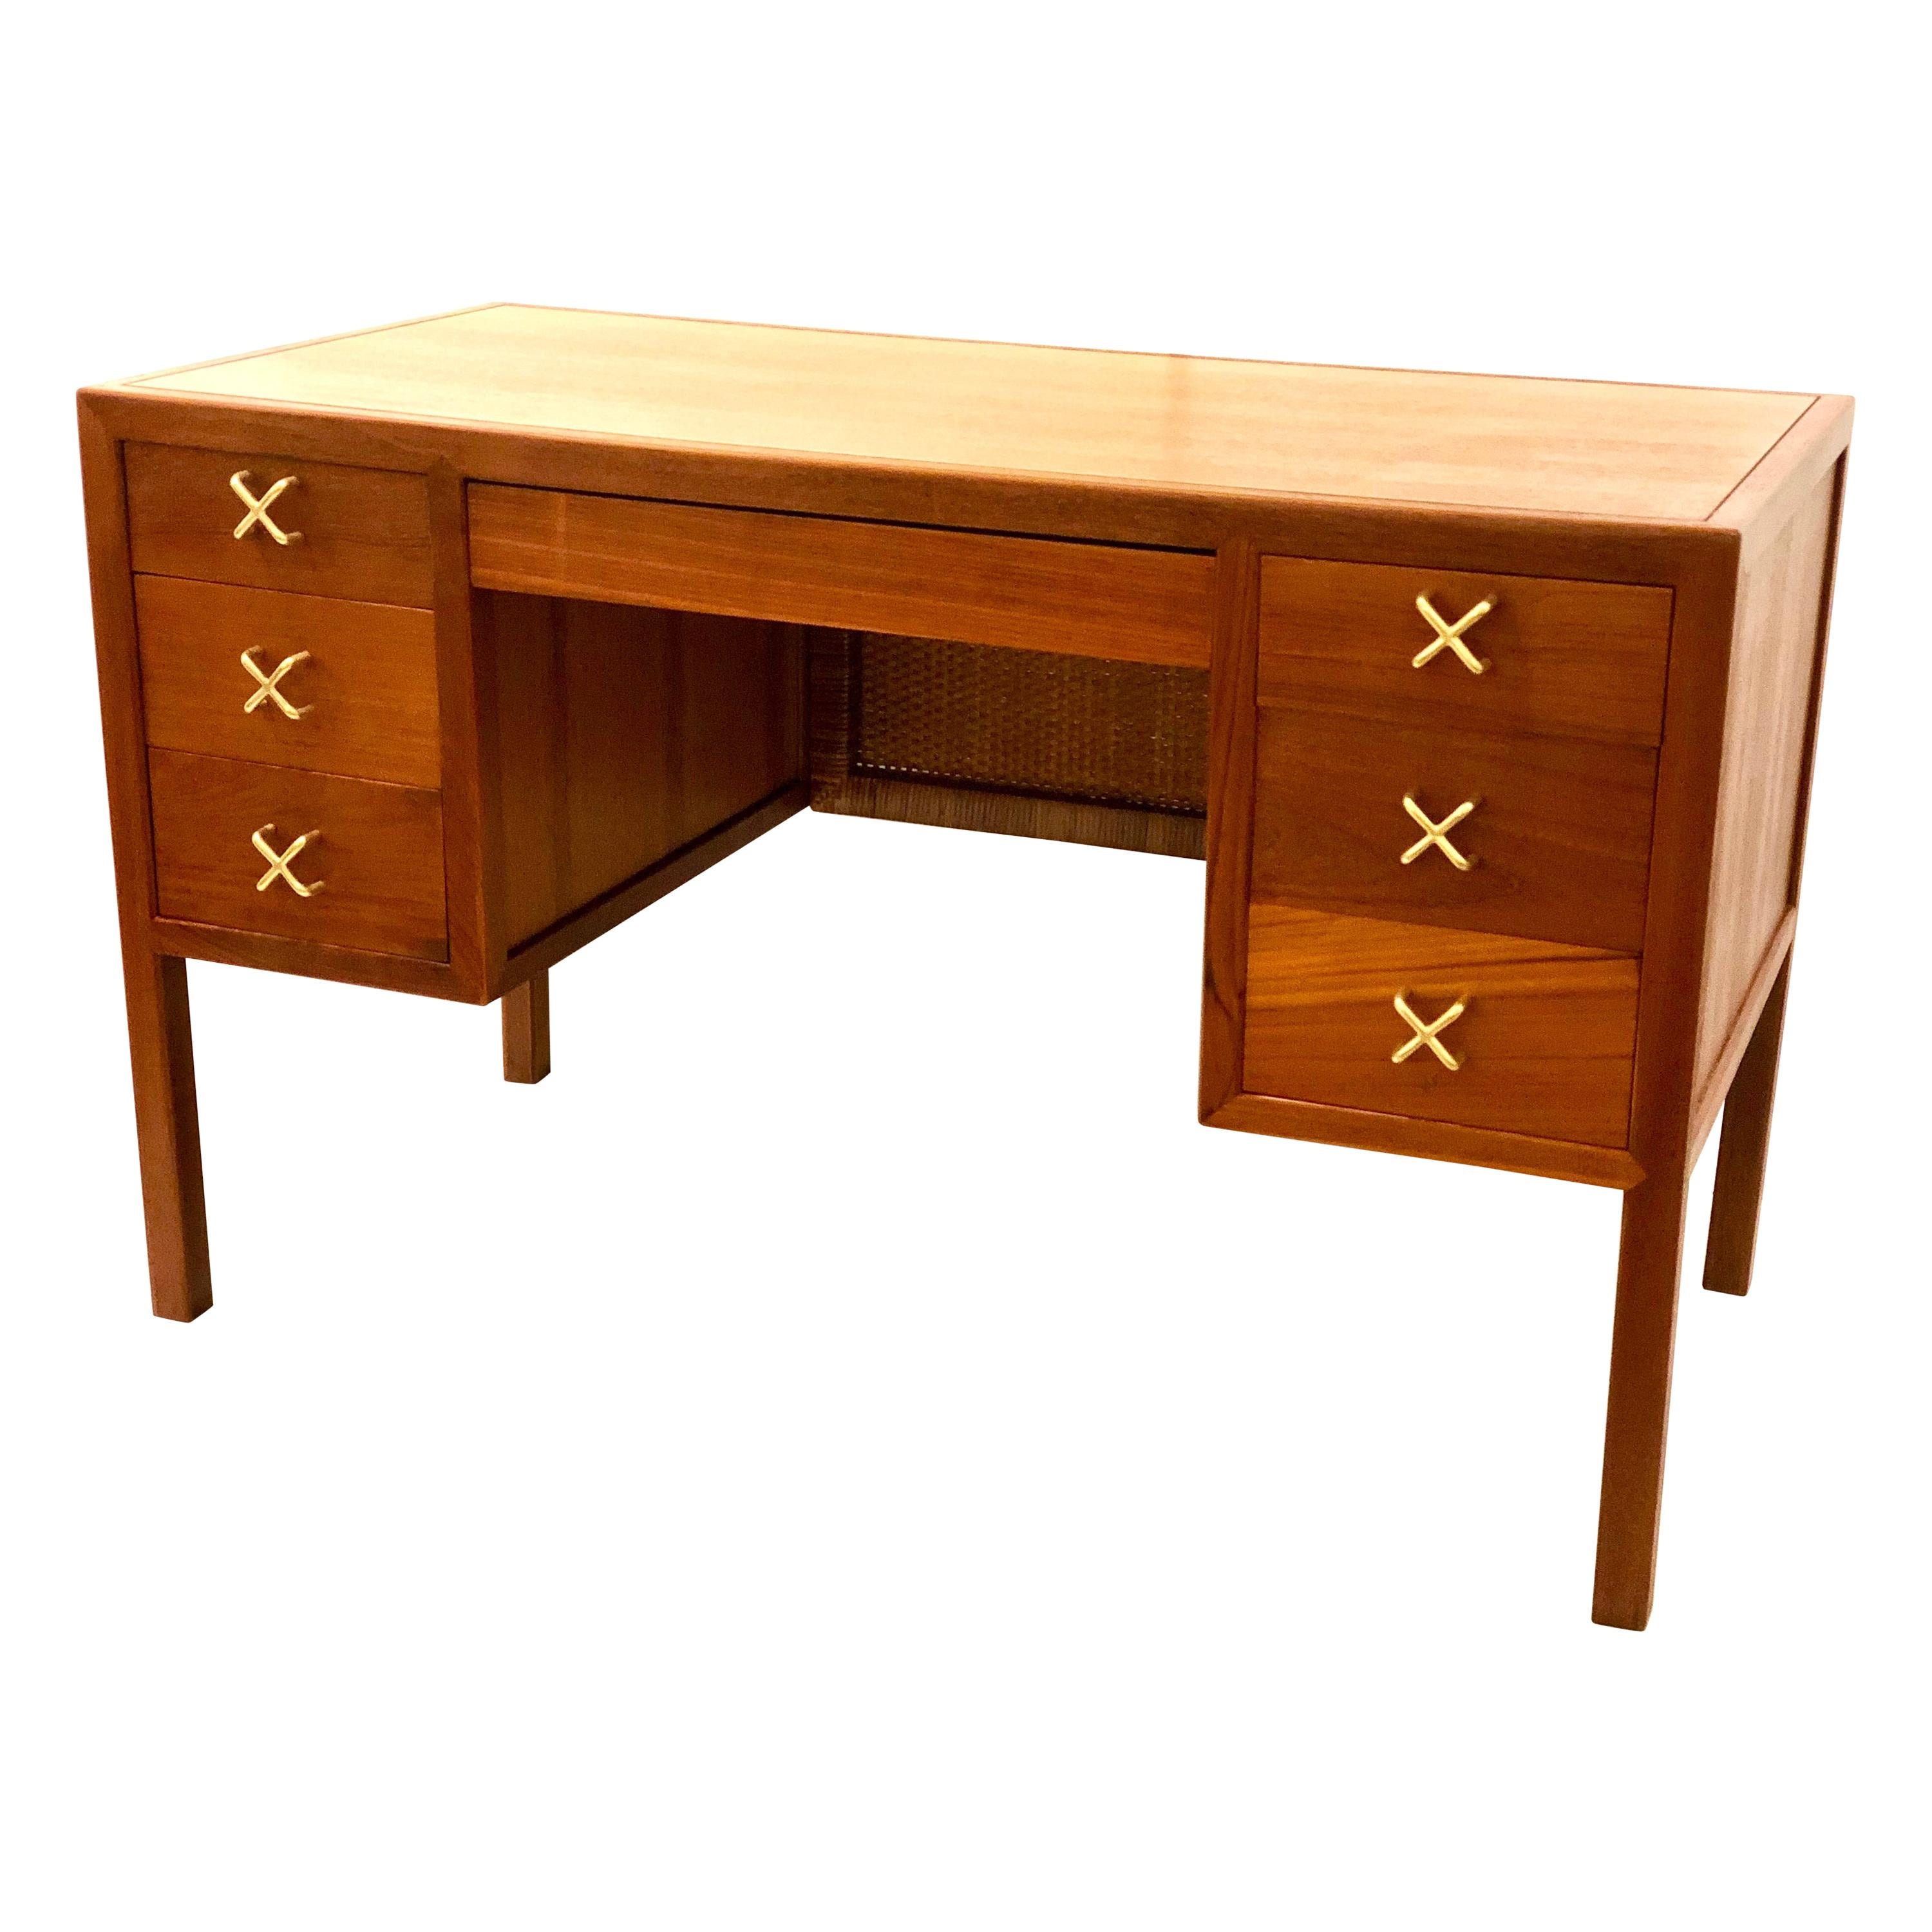 Rare Danish Modern Solid Teak Desk with X Brass Handles and Cane Back